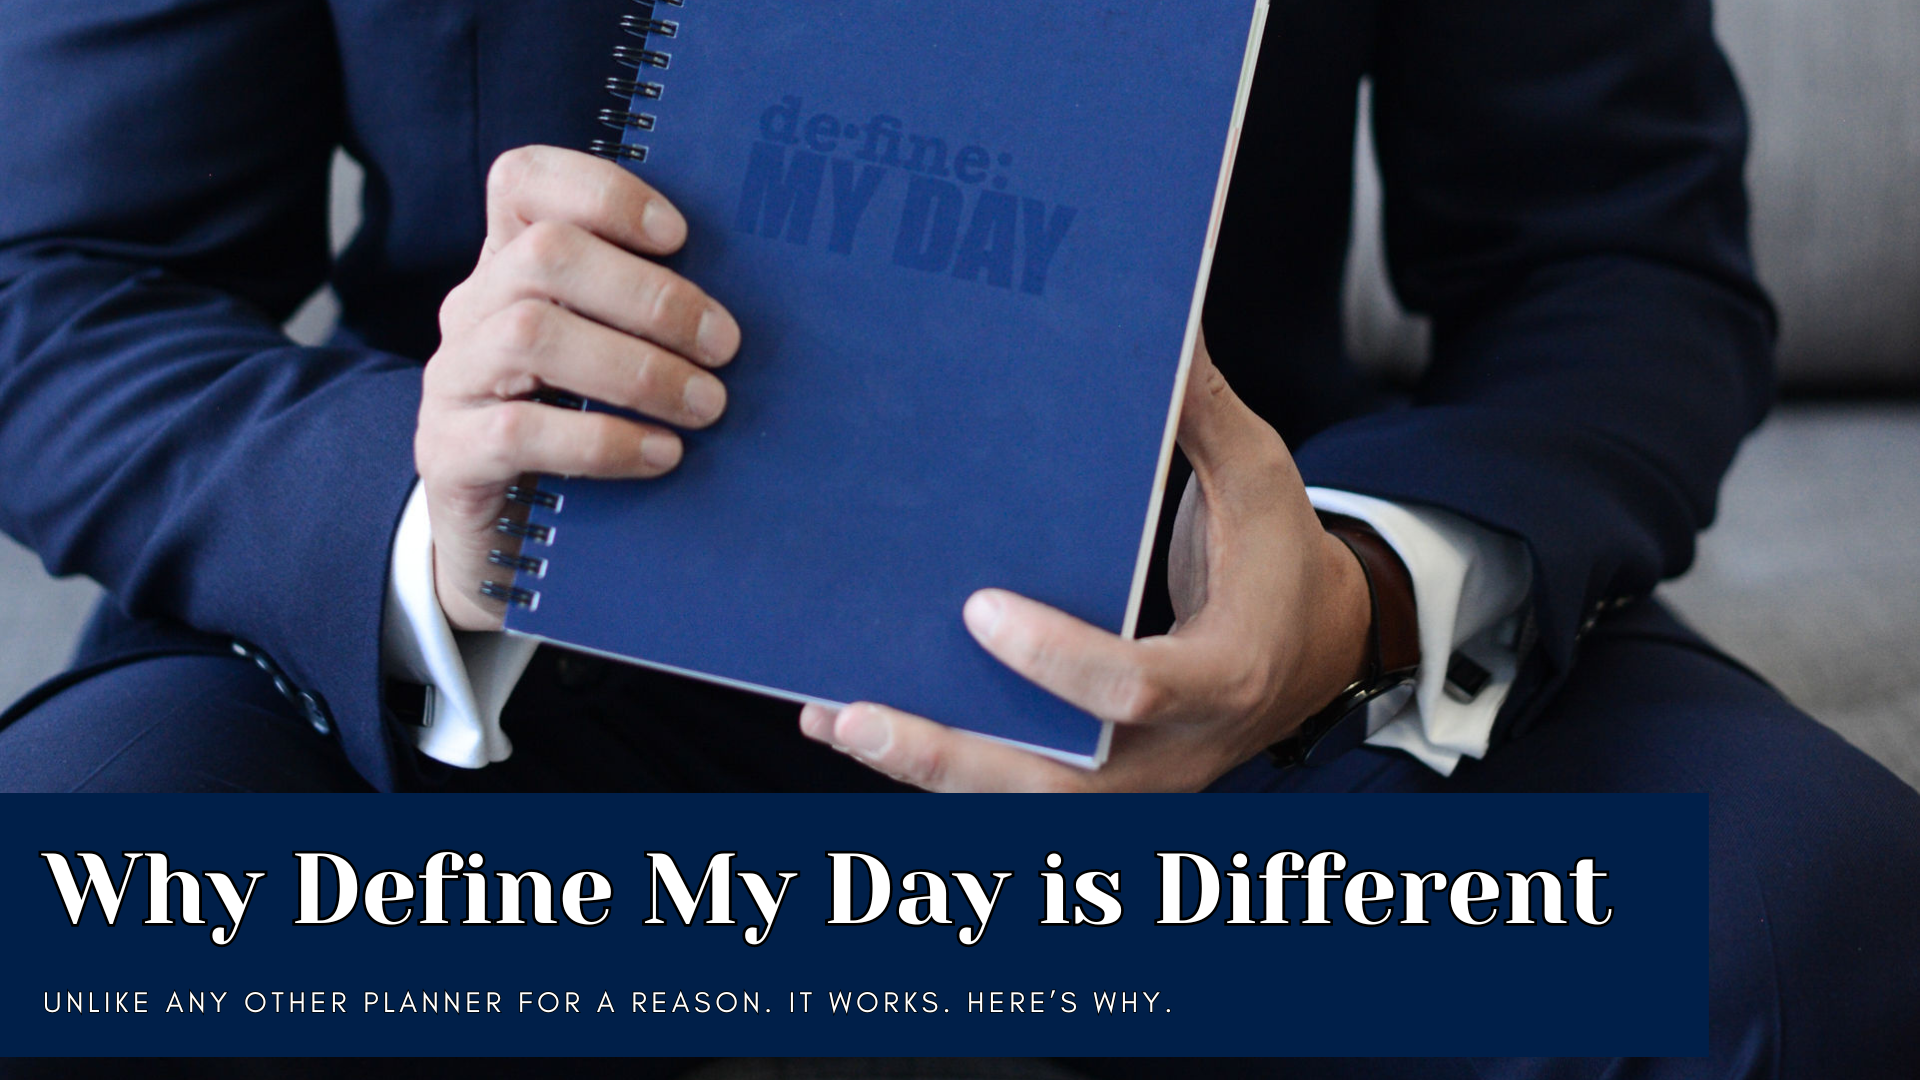 Load video: Why define my day is different